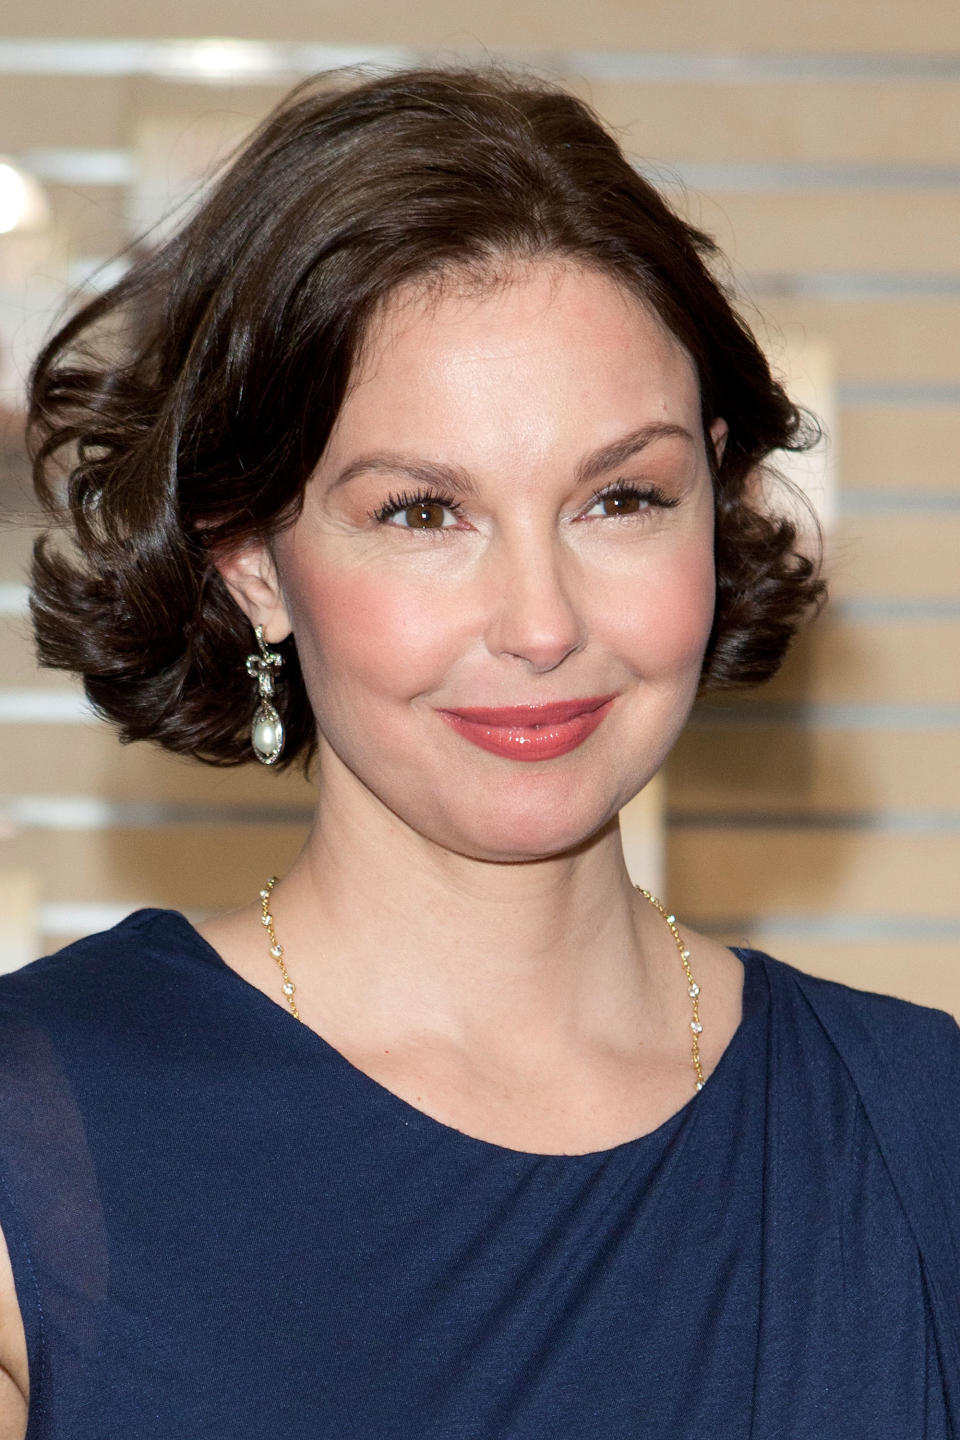 Ashley Judd In Conversation With The United Nations Office On Drugs And Crime